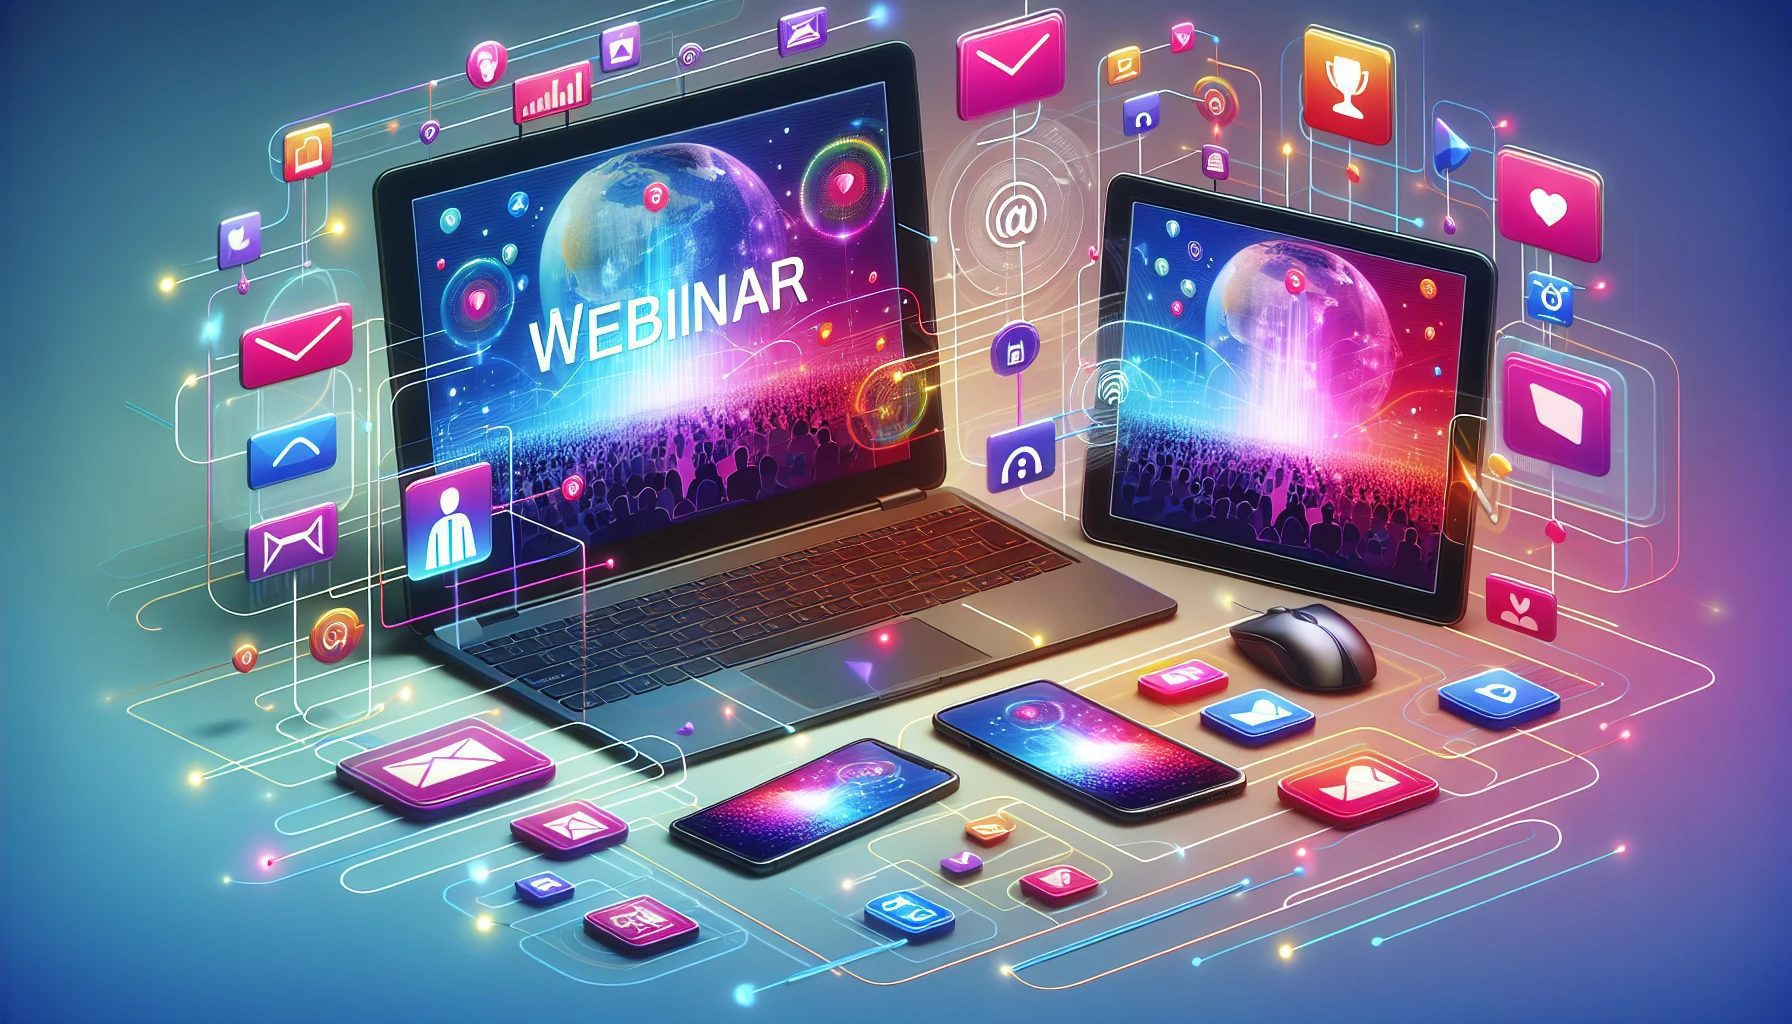 Illustration of promoting a webinar through various channels